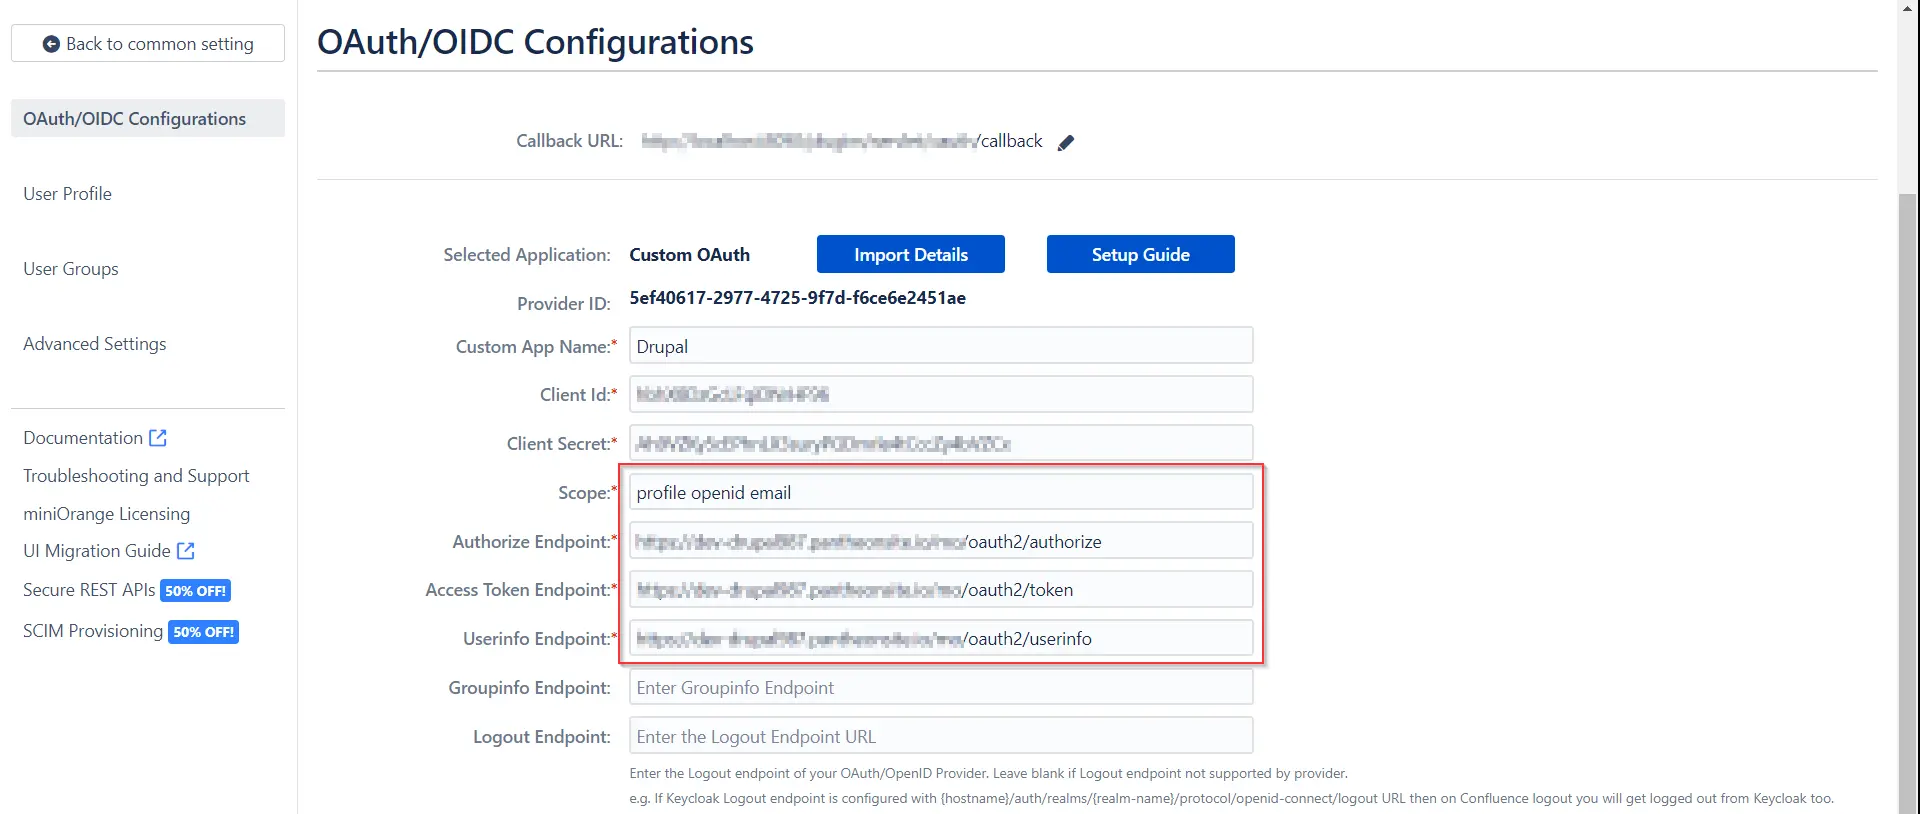  Integrating Confluence with Drupal OAuth/OIDC Provider - Provide Scope and Endpoints in Confluence Application